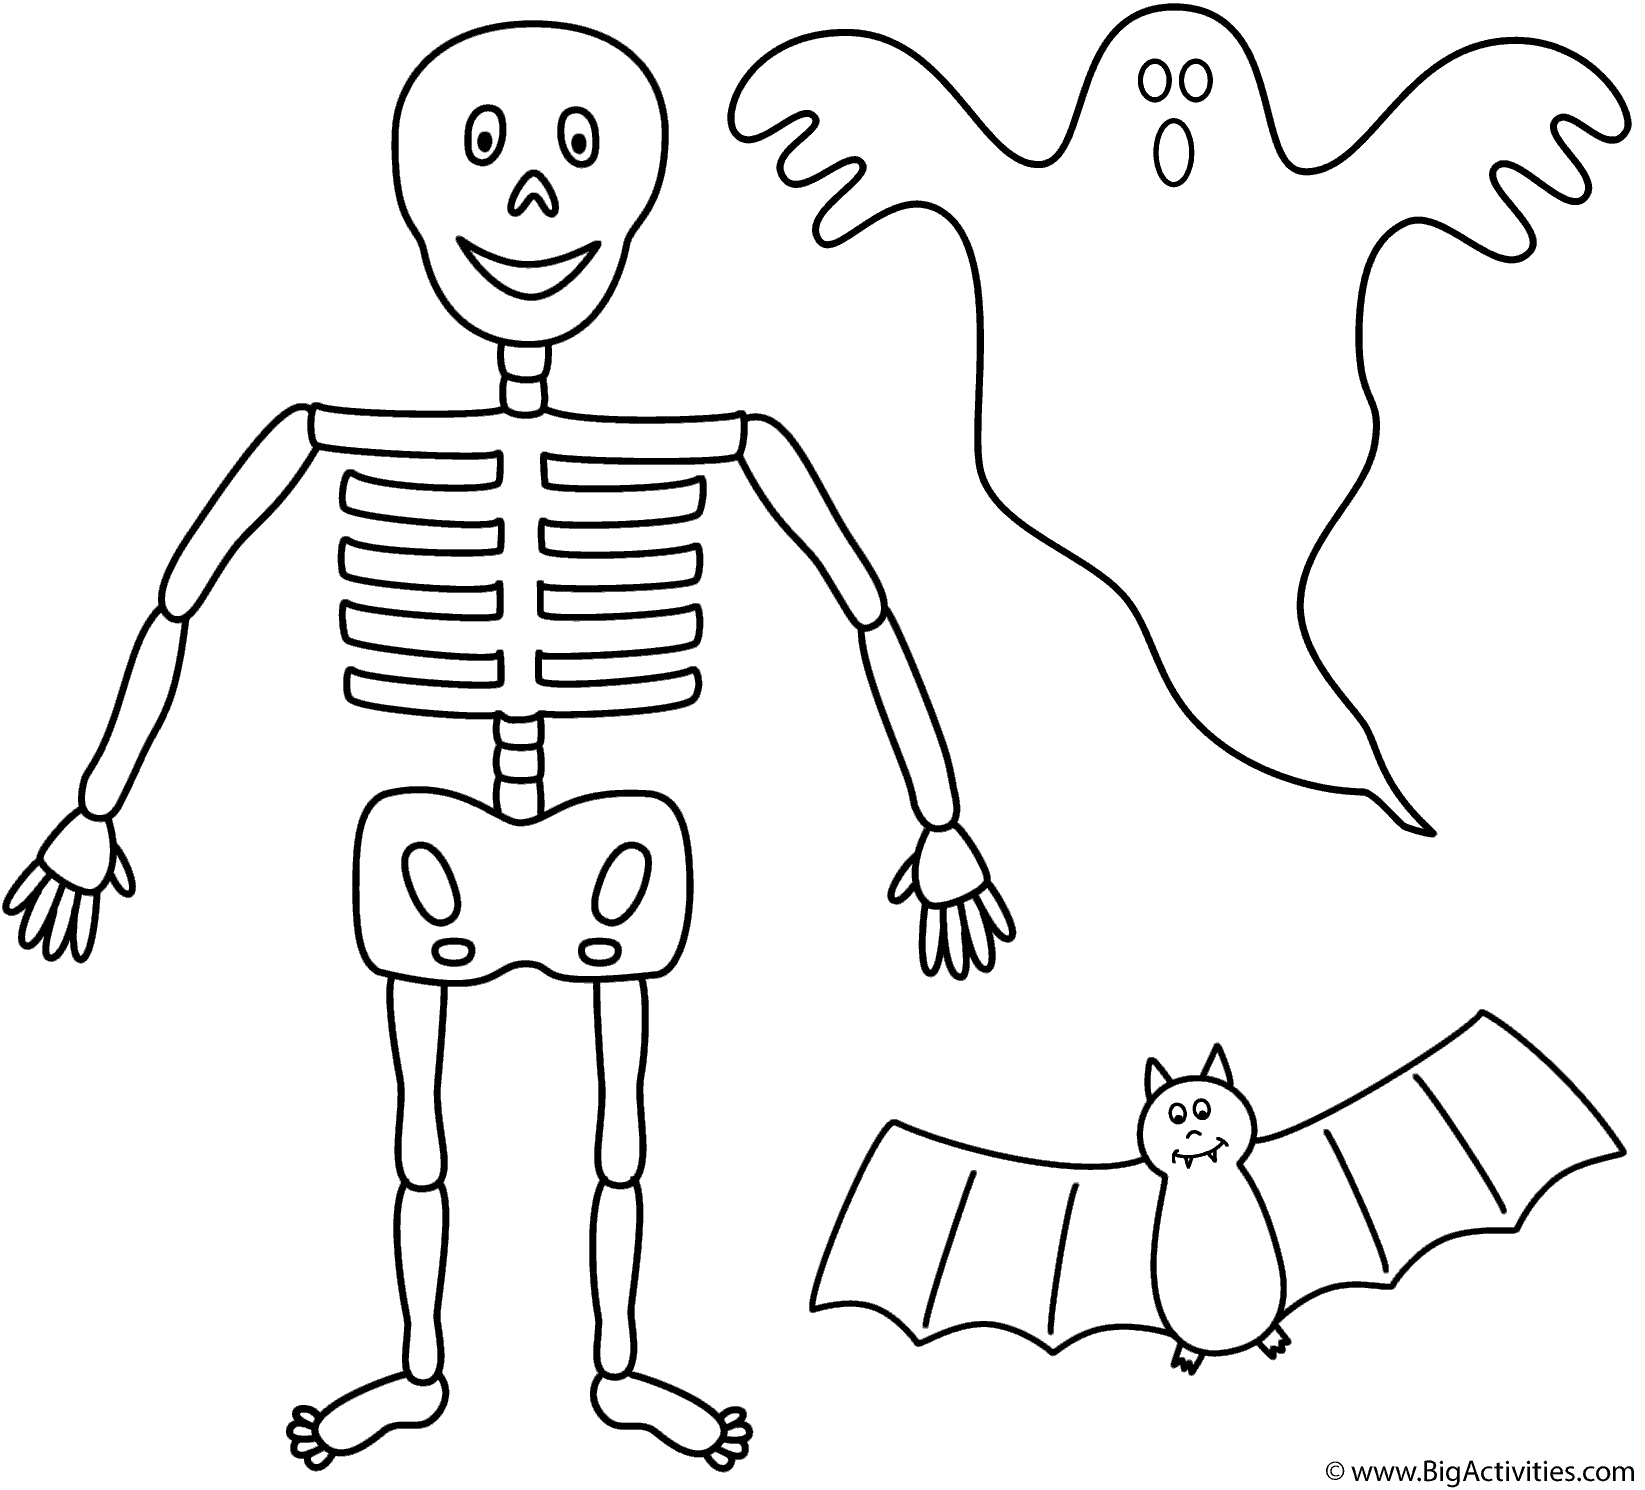 Skeleton with bat and ghost Coloring Page Halloween